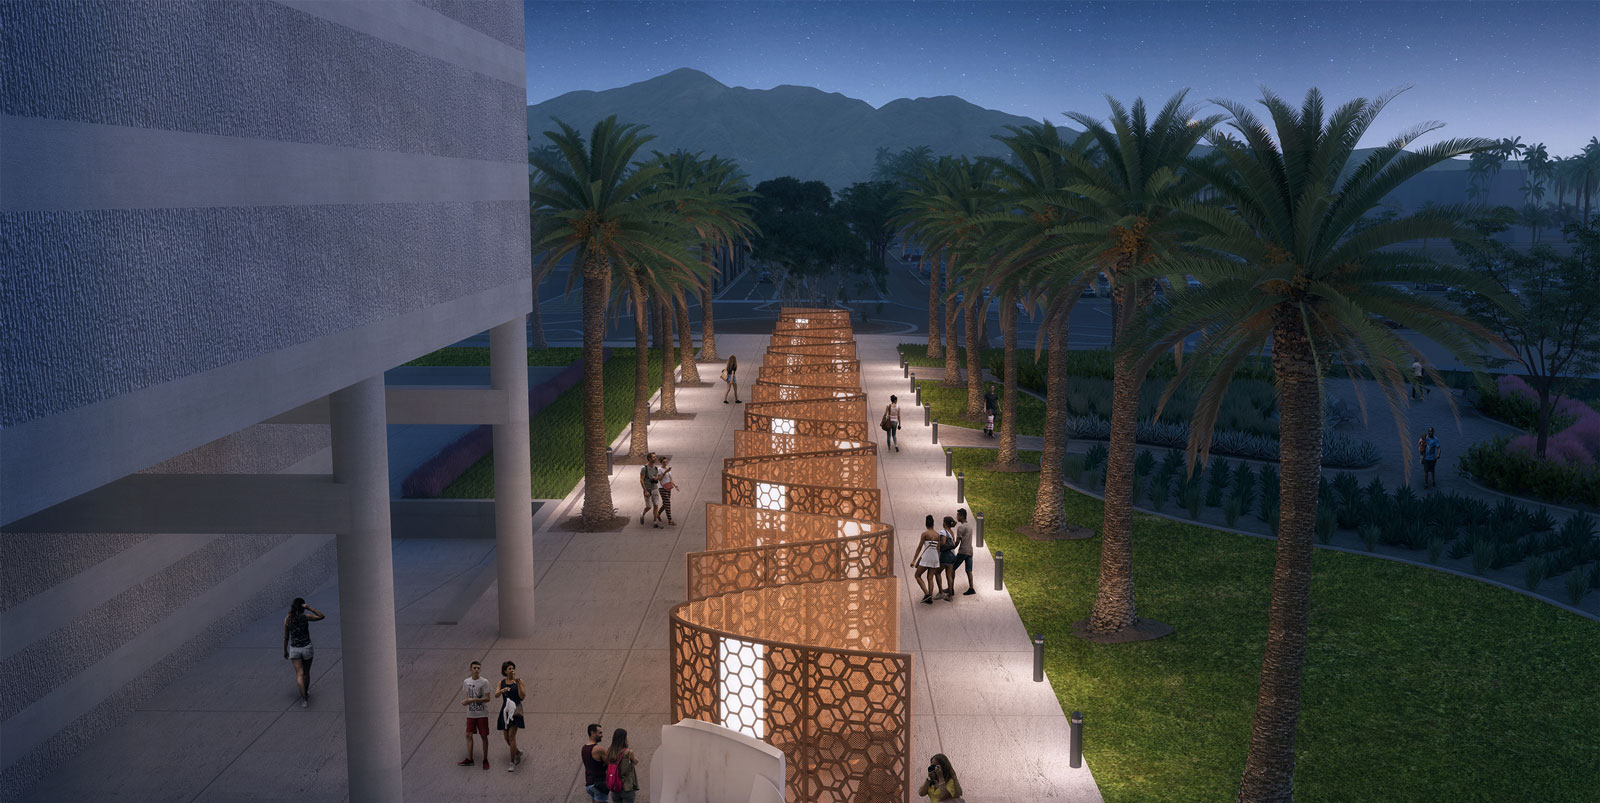 A rendering of the Memorial laid out in front of the San Bernardino County Government Center